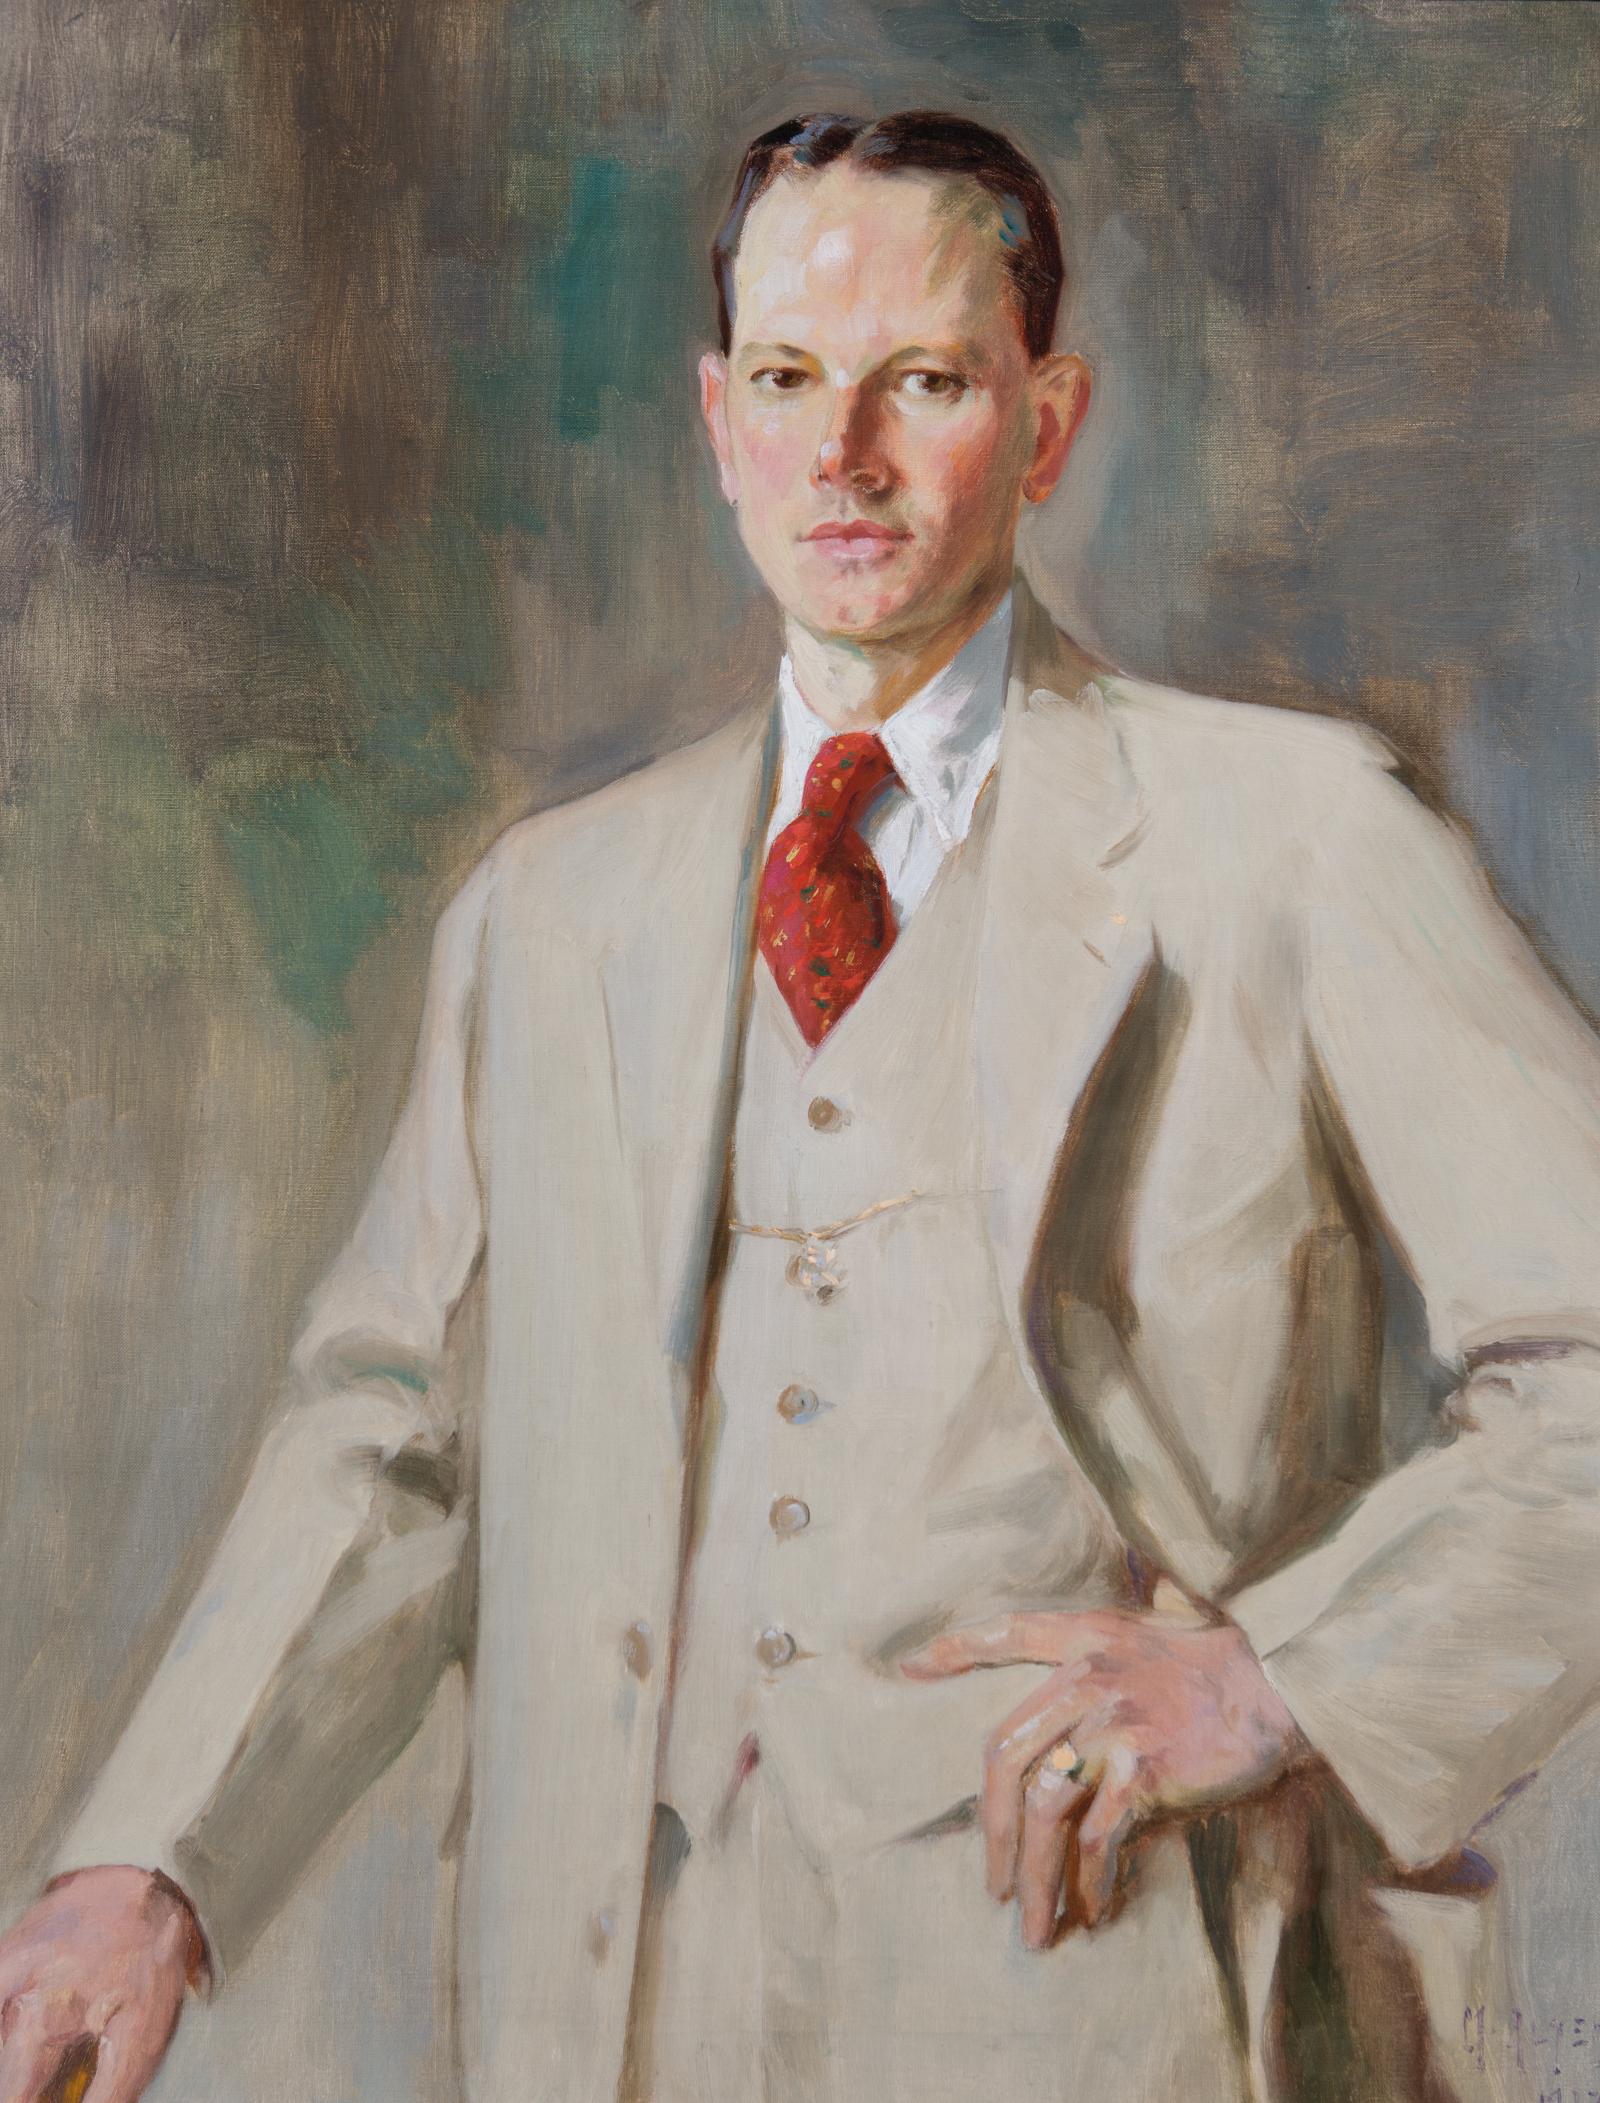 Portrait of man standing with one hand on left hip; wearing light-colored suit with red tie tucked into it.